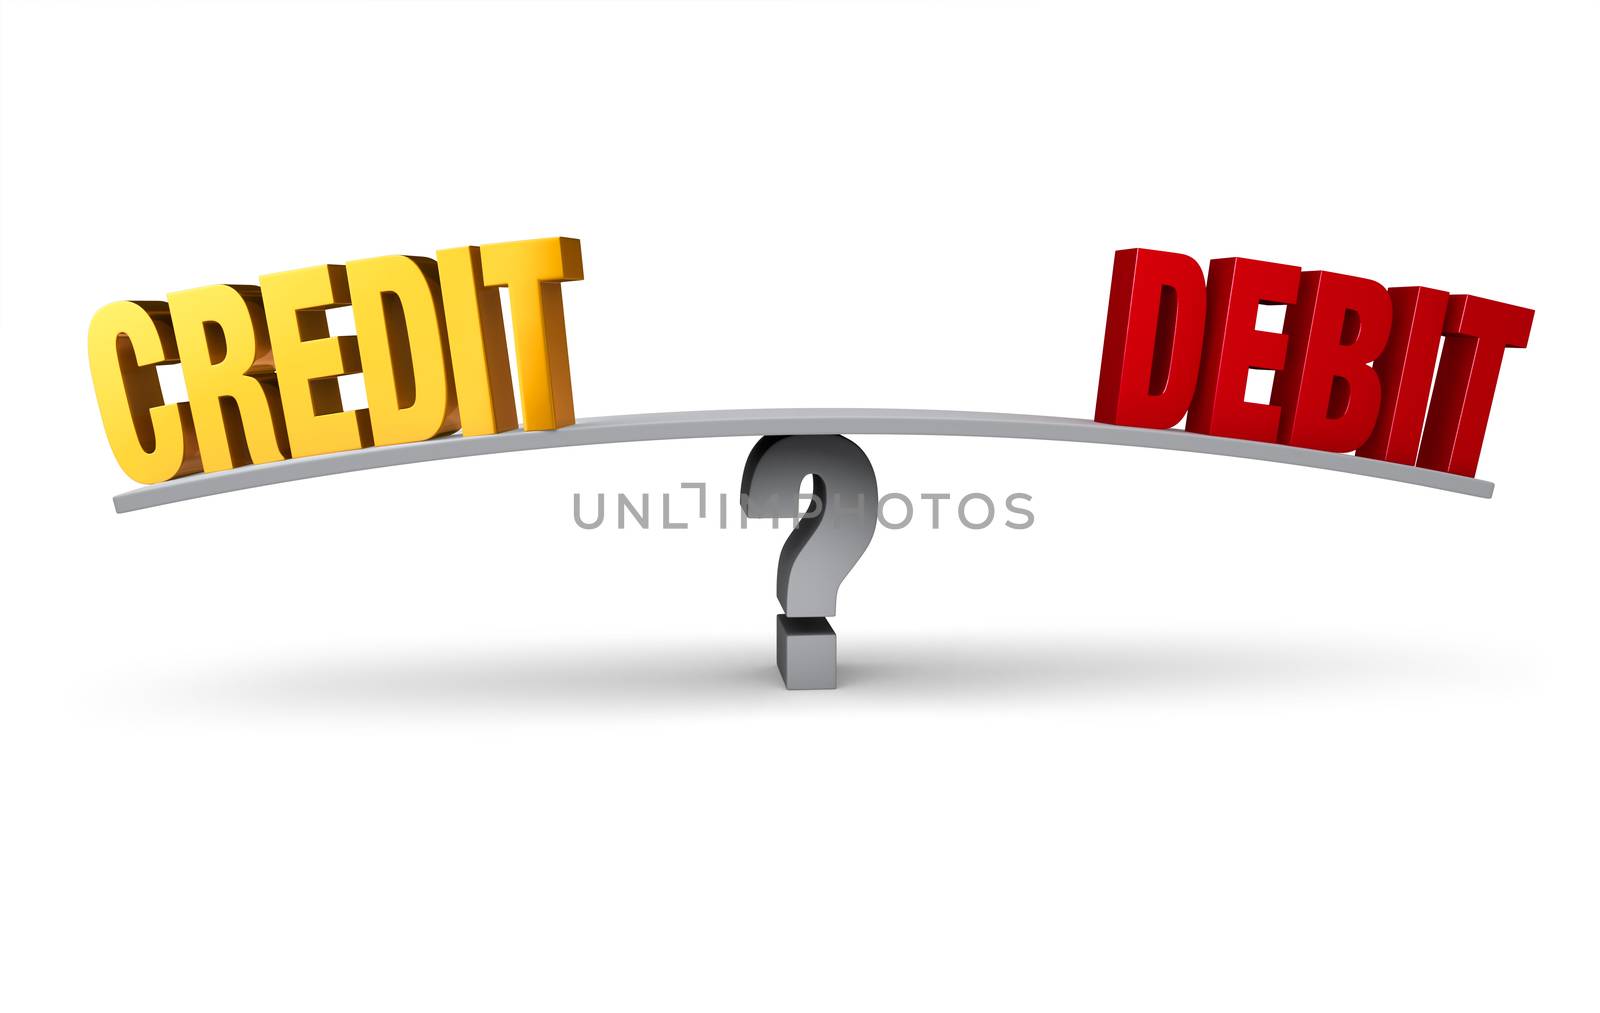 Bright, gold "CREDIT" and red "DEBIT" sit on opposite ends of a gray board which is balanced on a question mark. Isolated on white.